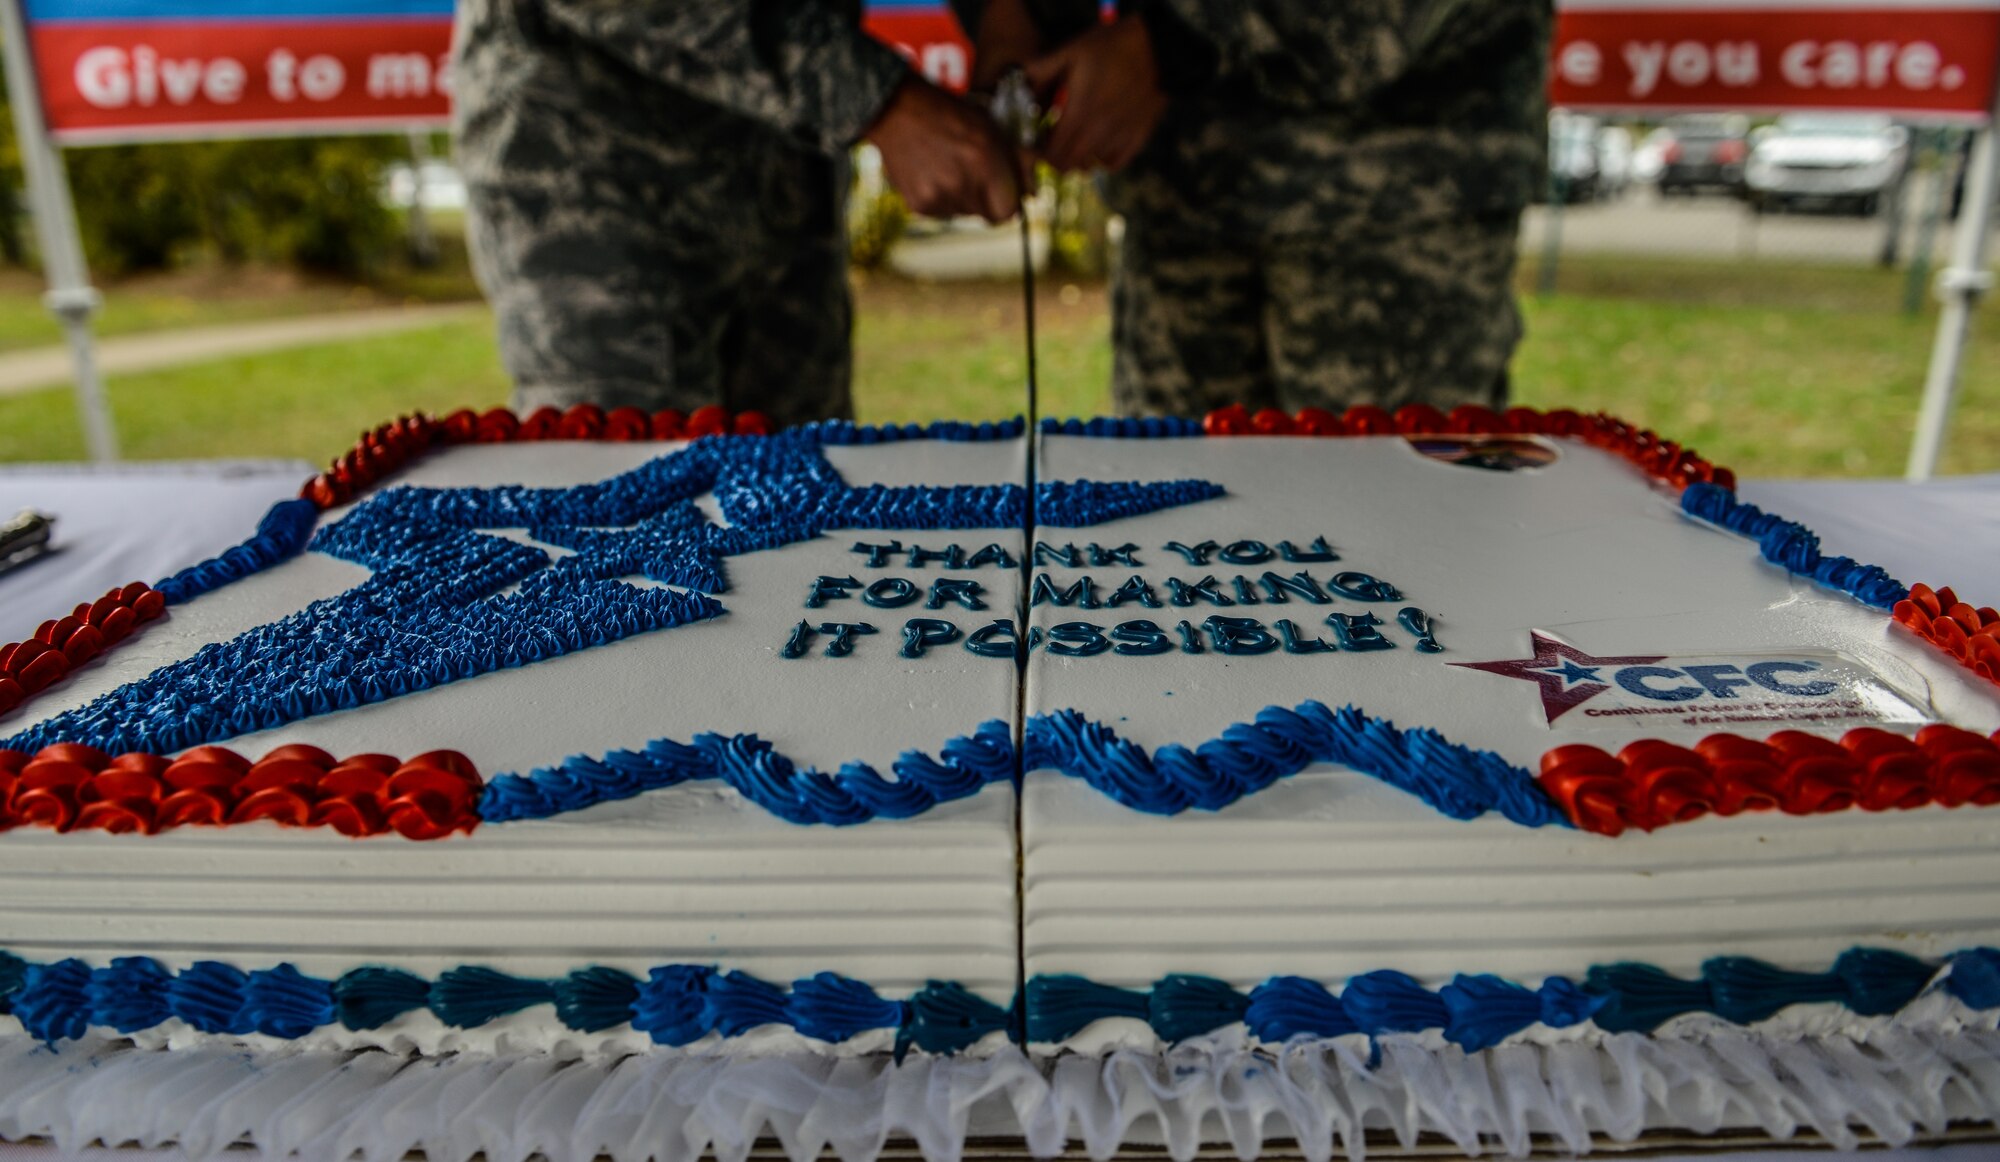 Brig. Gen. Jon T. Thomas, 86th Airlift Wing commander, and Col. G. Shawn Wells, U.S. Army Garrison Rheinland-Pfalz commander, cut a cake during the opening ceremony of the Combined Federal Campaign-Overseas kickoff Sept. 15, 2015, on Vogelweh Military Complex, Germany. The CFC-O holds an annual fundraiser that helps commanders improve quality of life programs for service members. (U.S. Air Force photo/Senior Airman Nicole Sikorski)